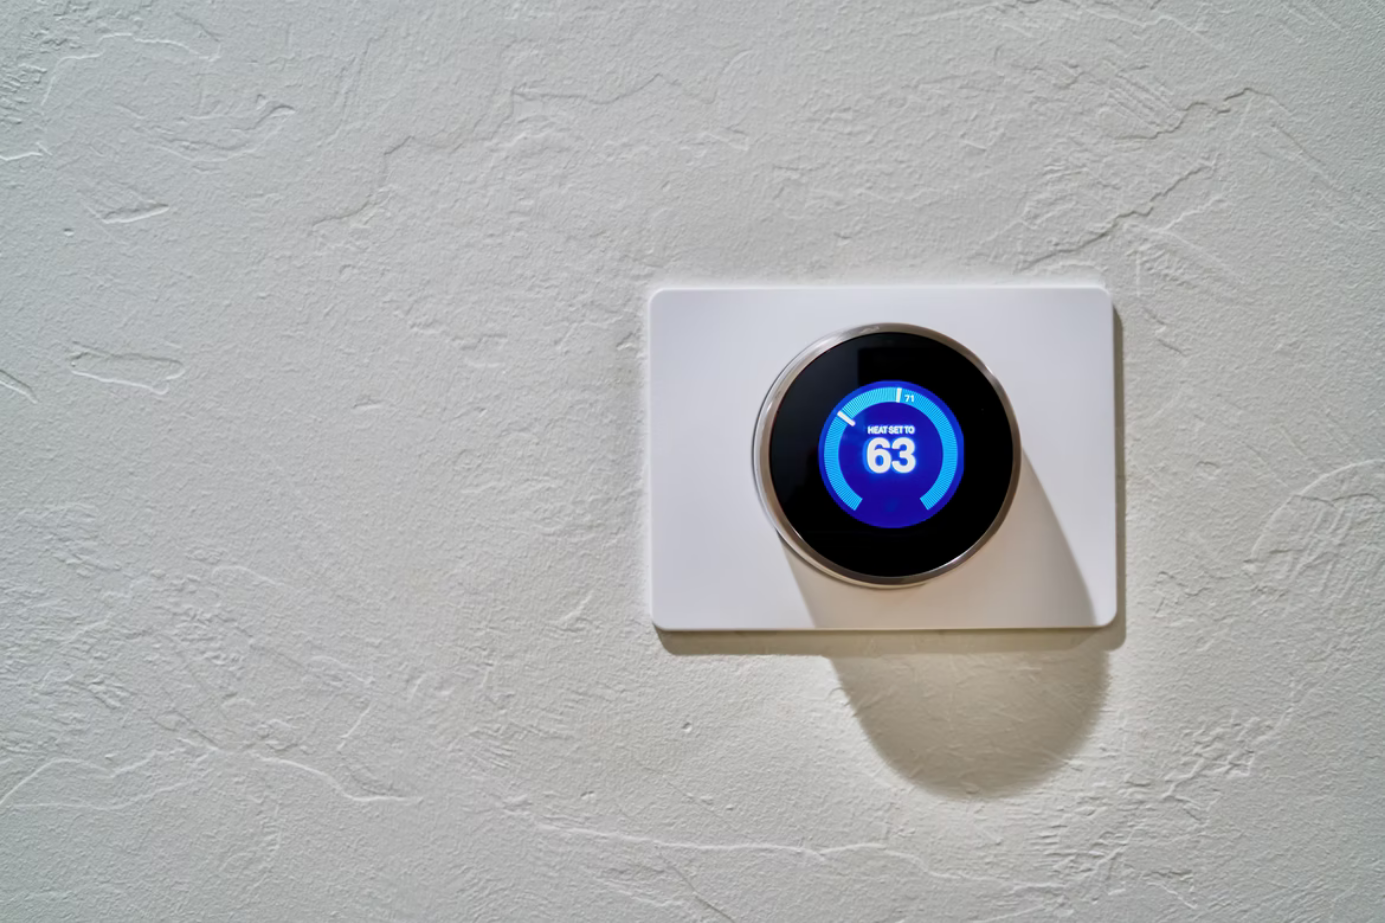 Does Nest Thermostat need a WiFi connection to work